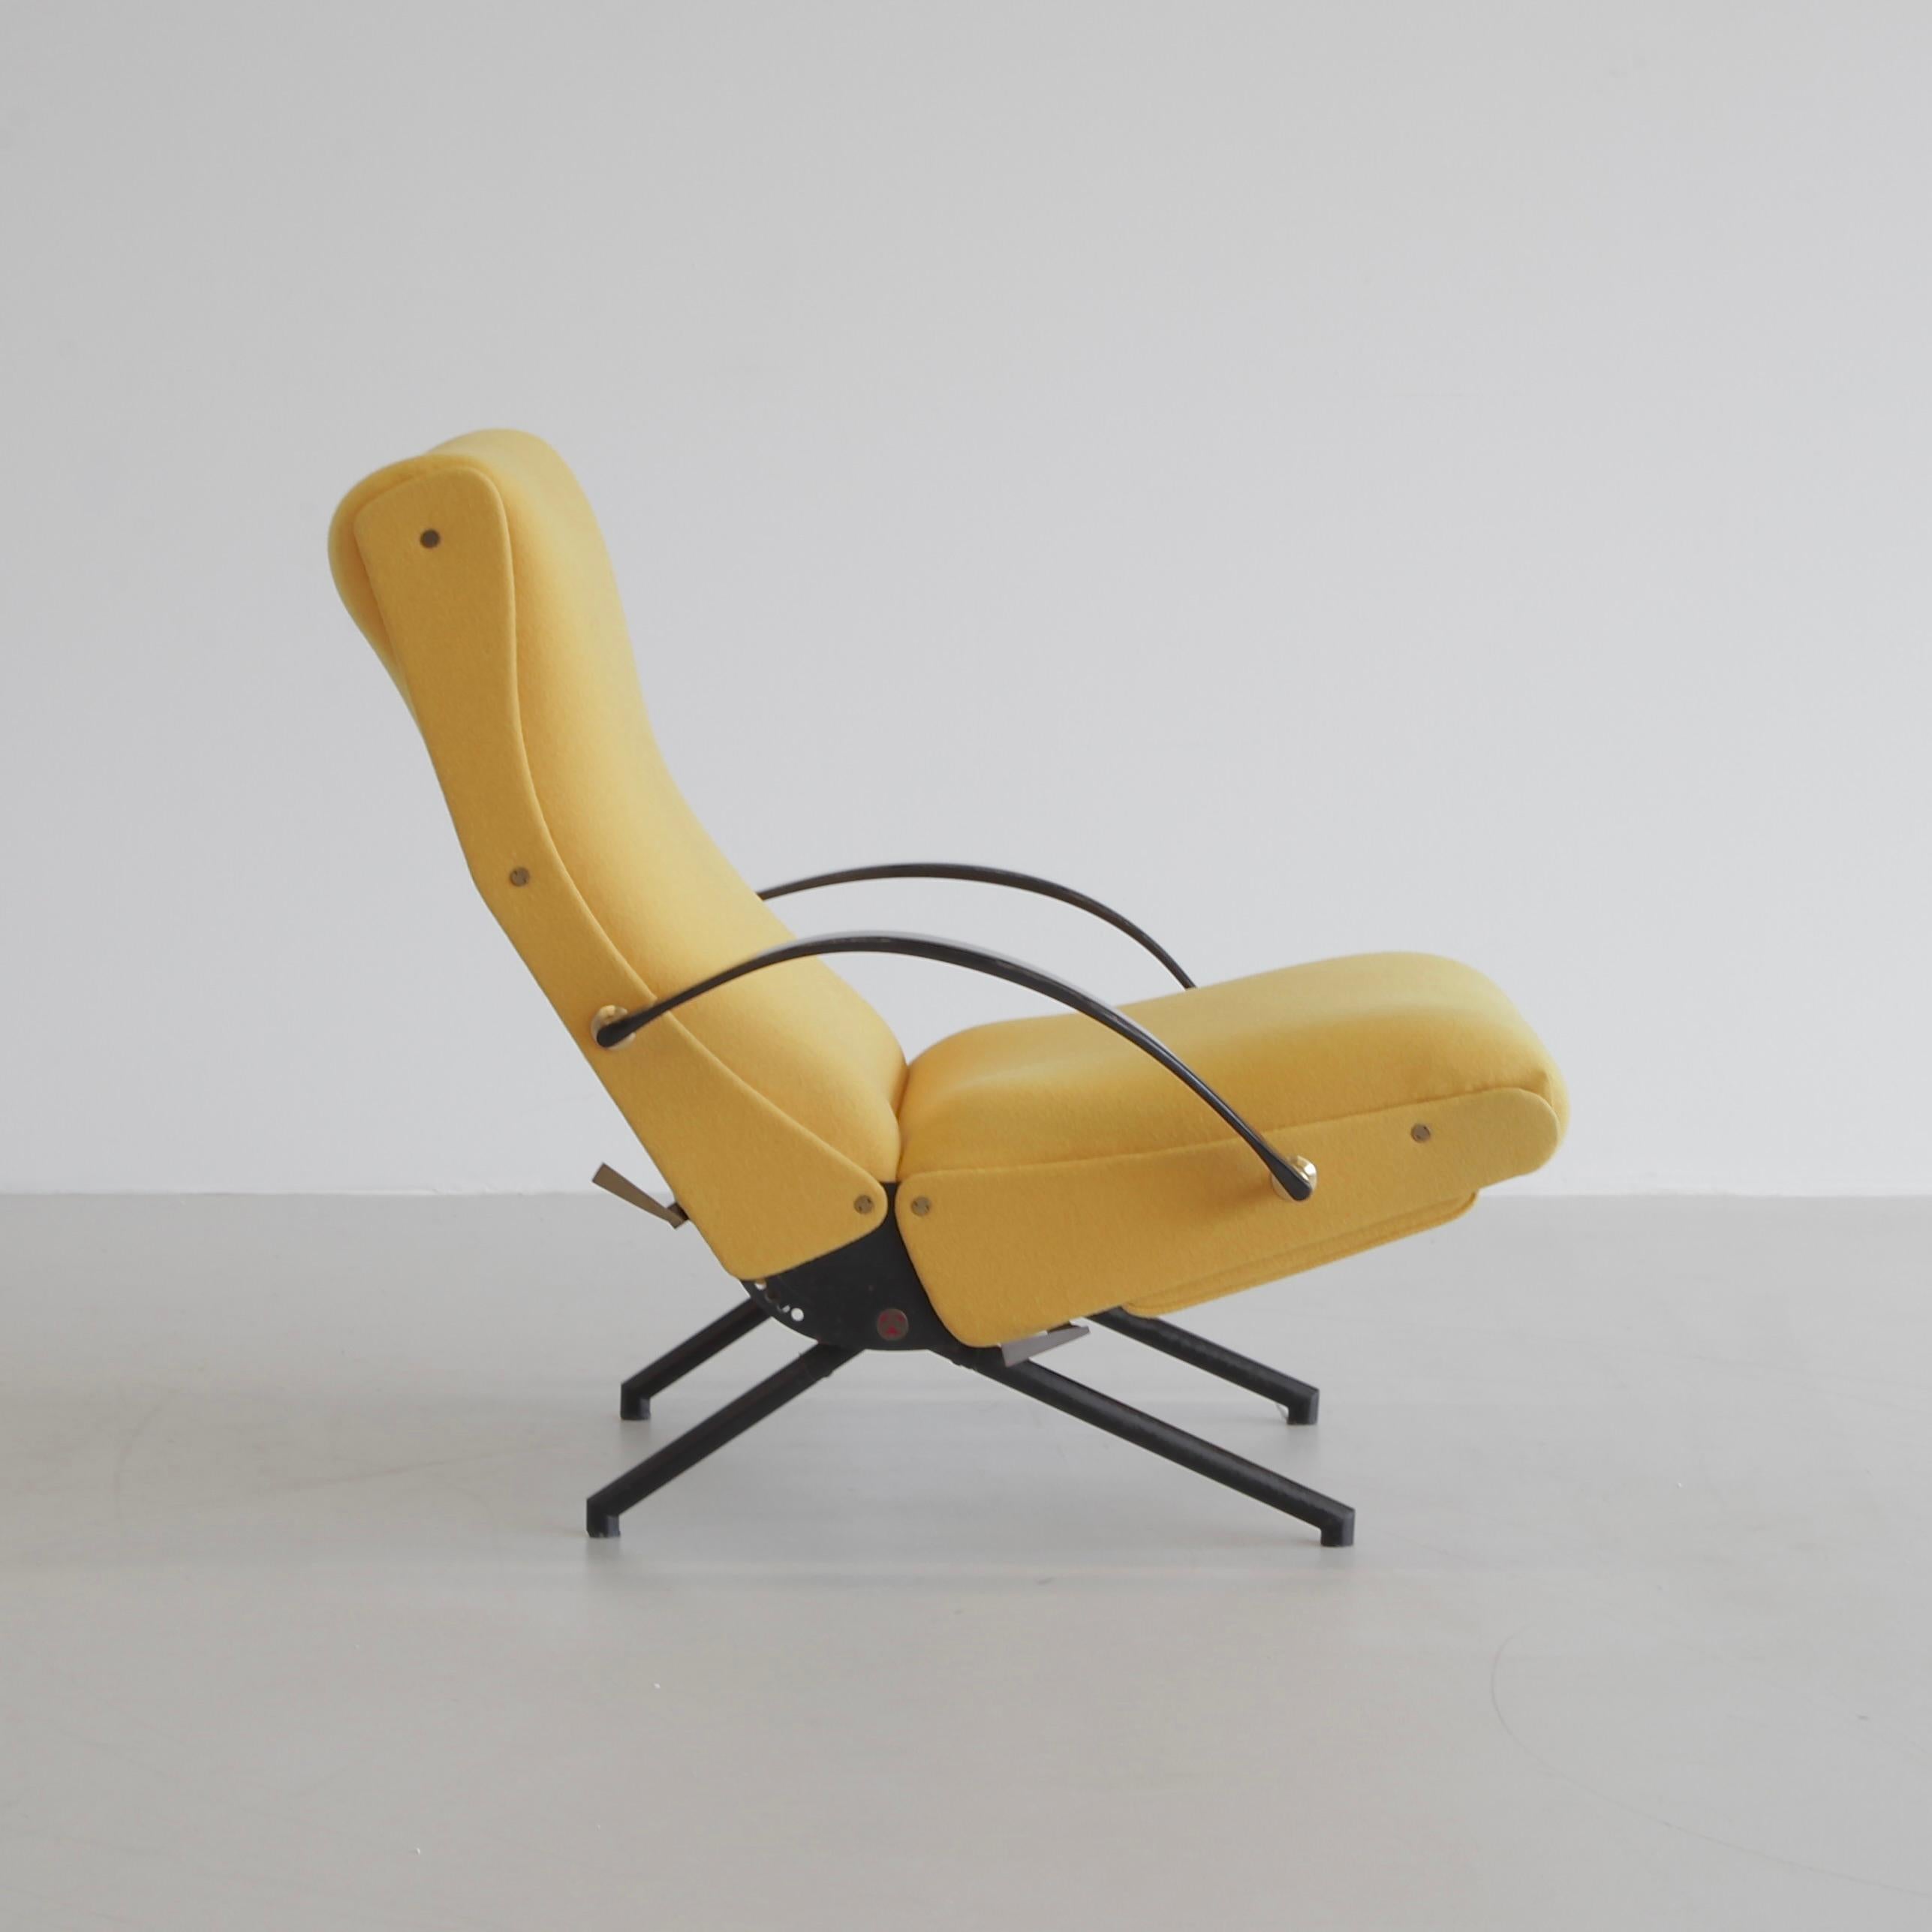 The 'P40' variable tilt armchair, produced by Tecno, Milan 1956.

Black tubular frame with rubber armrests. The seat, back and footrest are upholstered in yellow wool material. The footrest is stored under the seat. Brass detail. New flexible